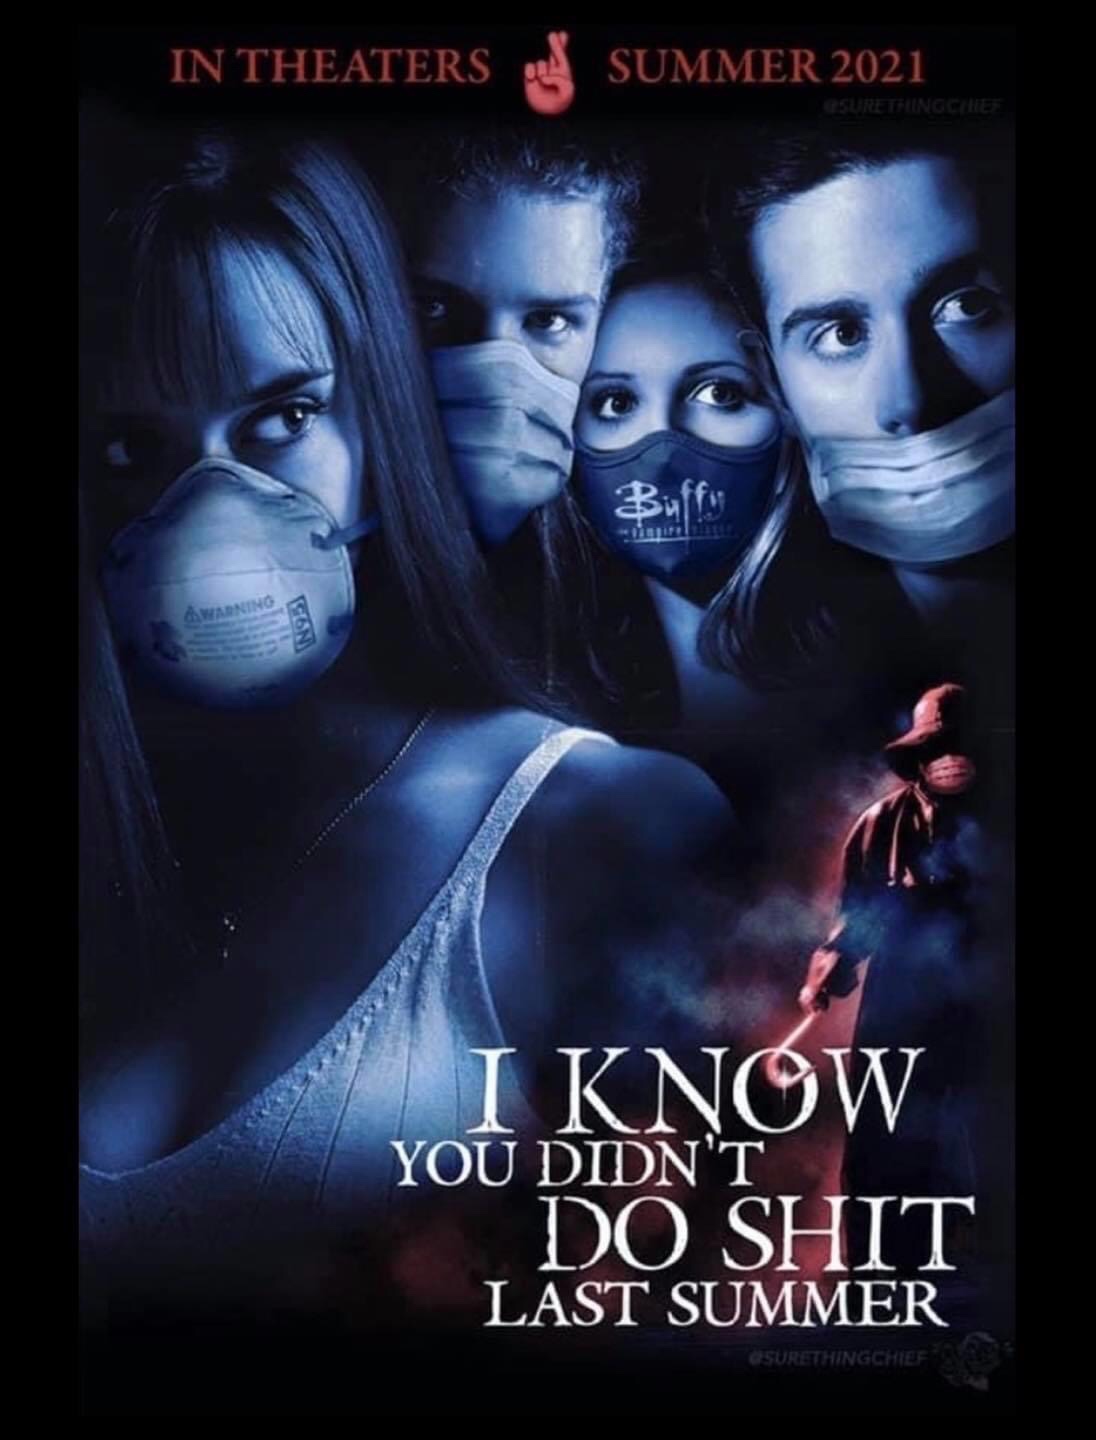 know what you did last summer poster - In Theaters A Summer 2021 Osurethingcheese Buffin Warning I Know You Didn'T Do Shit Last Summer Osurethingchief